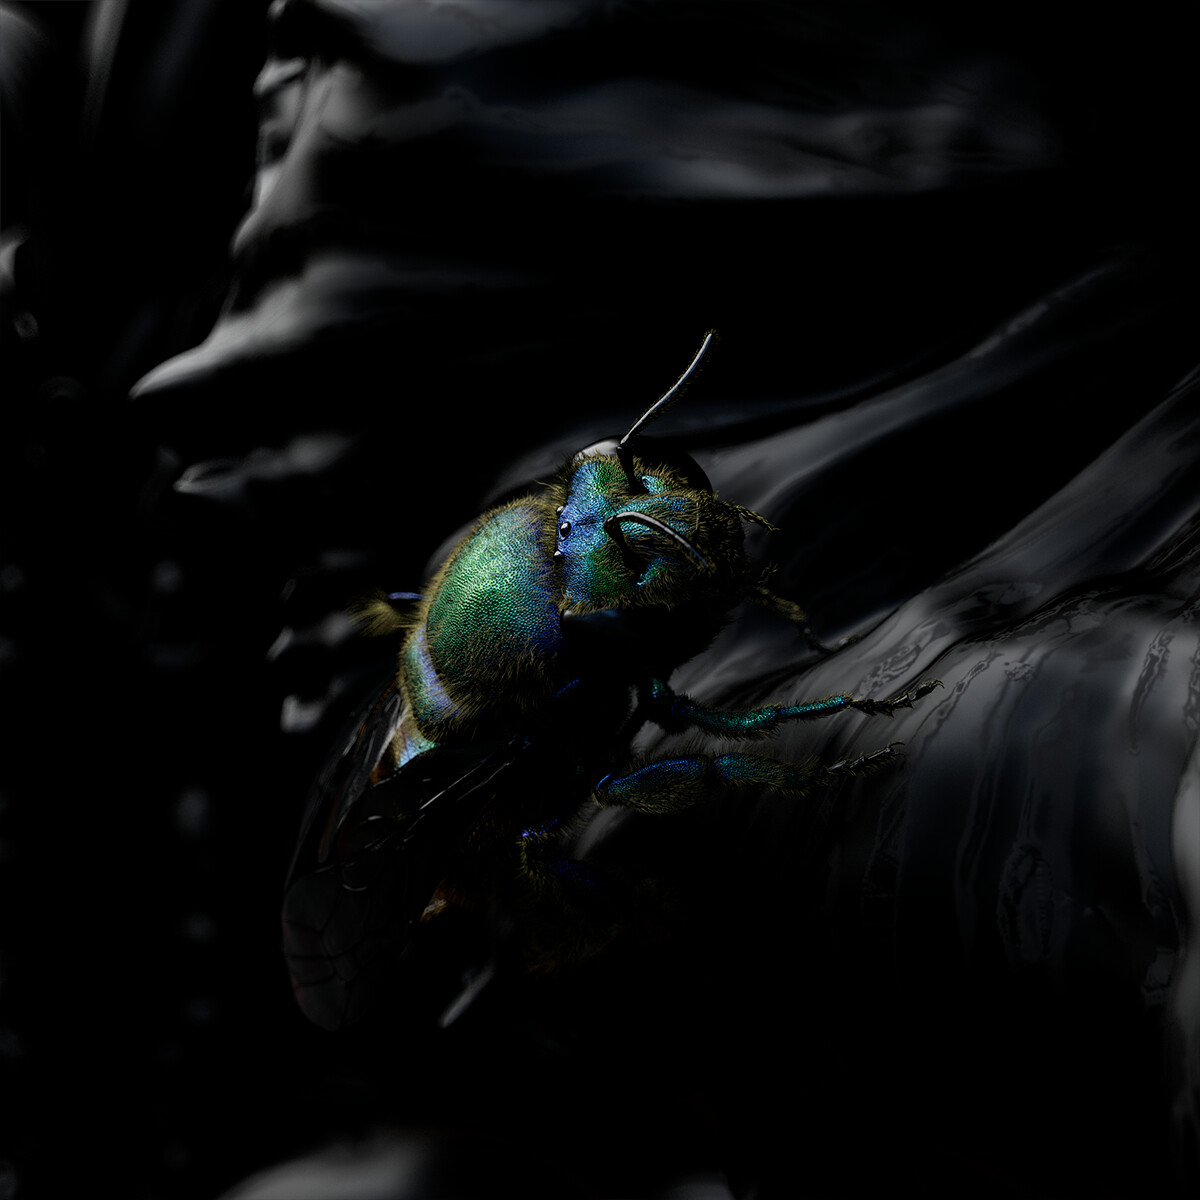 orchid bee model rendered in Redshift for Maya (specular reflection pass, I jut think it looks cool)